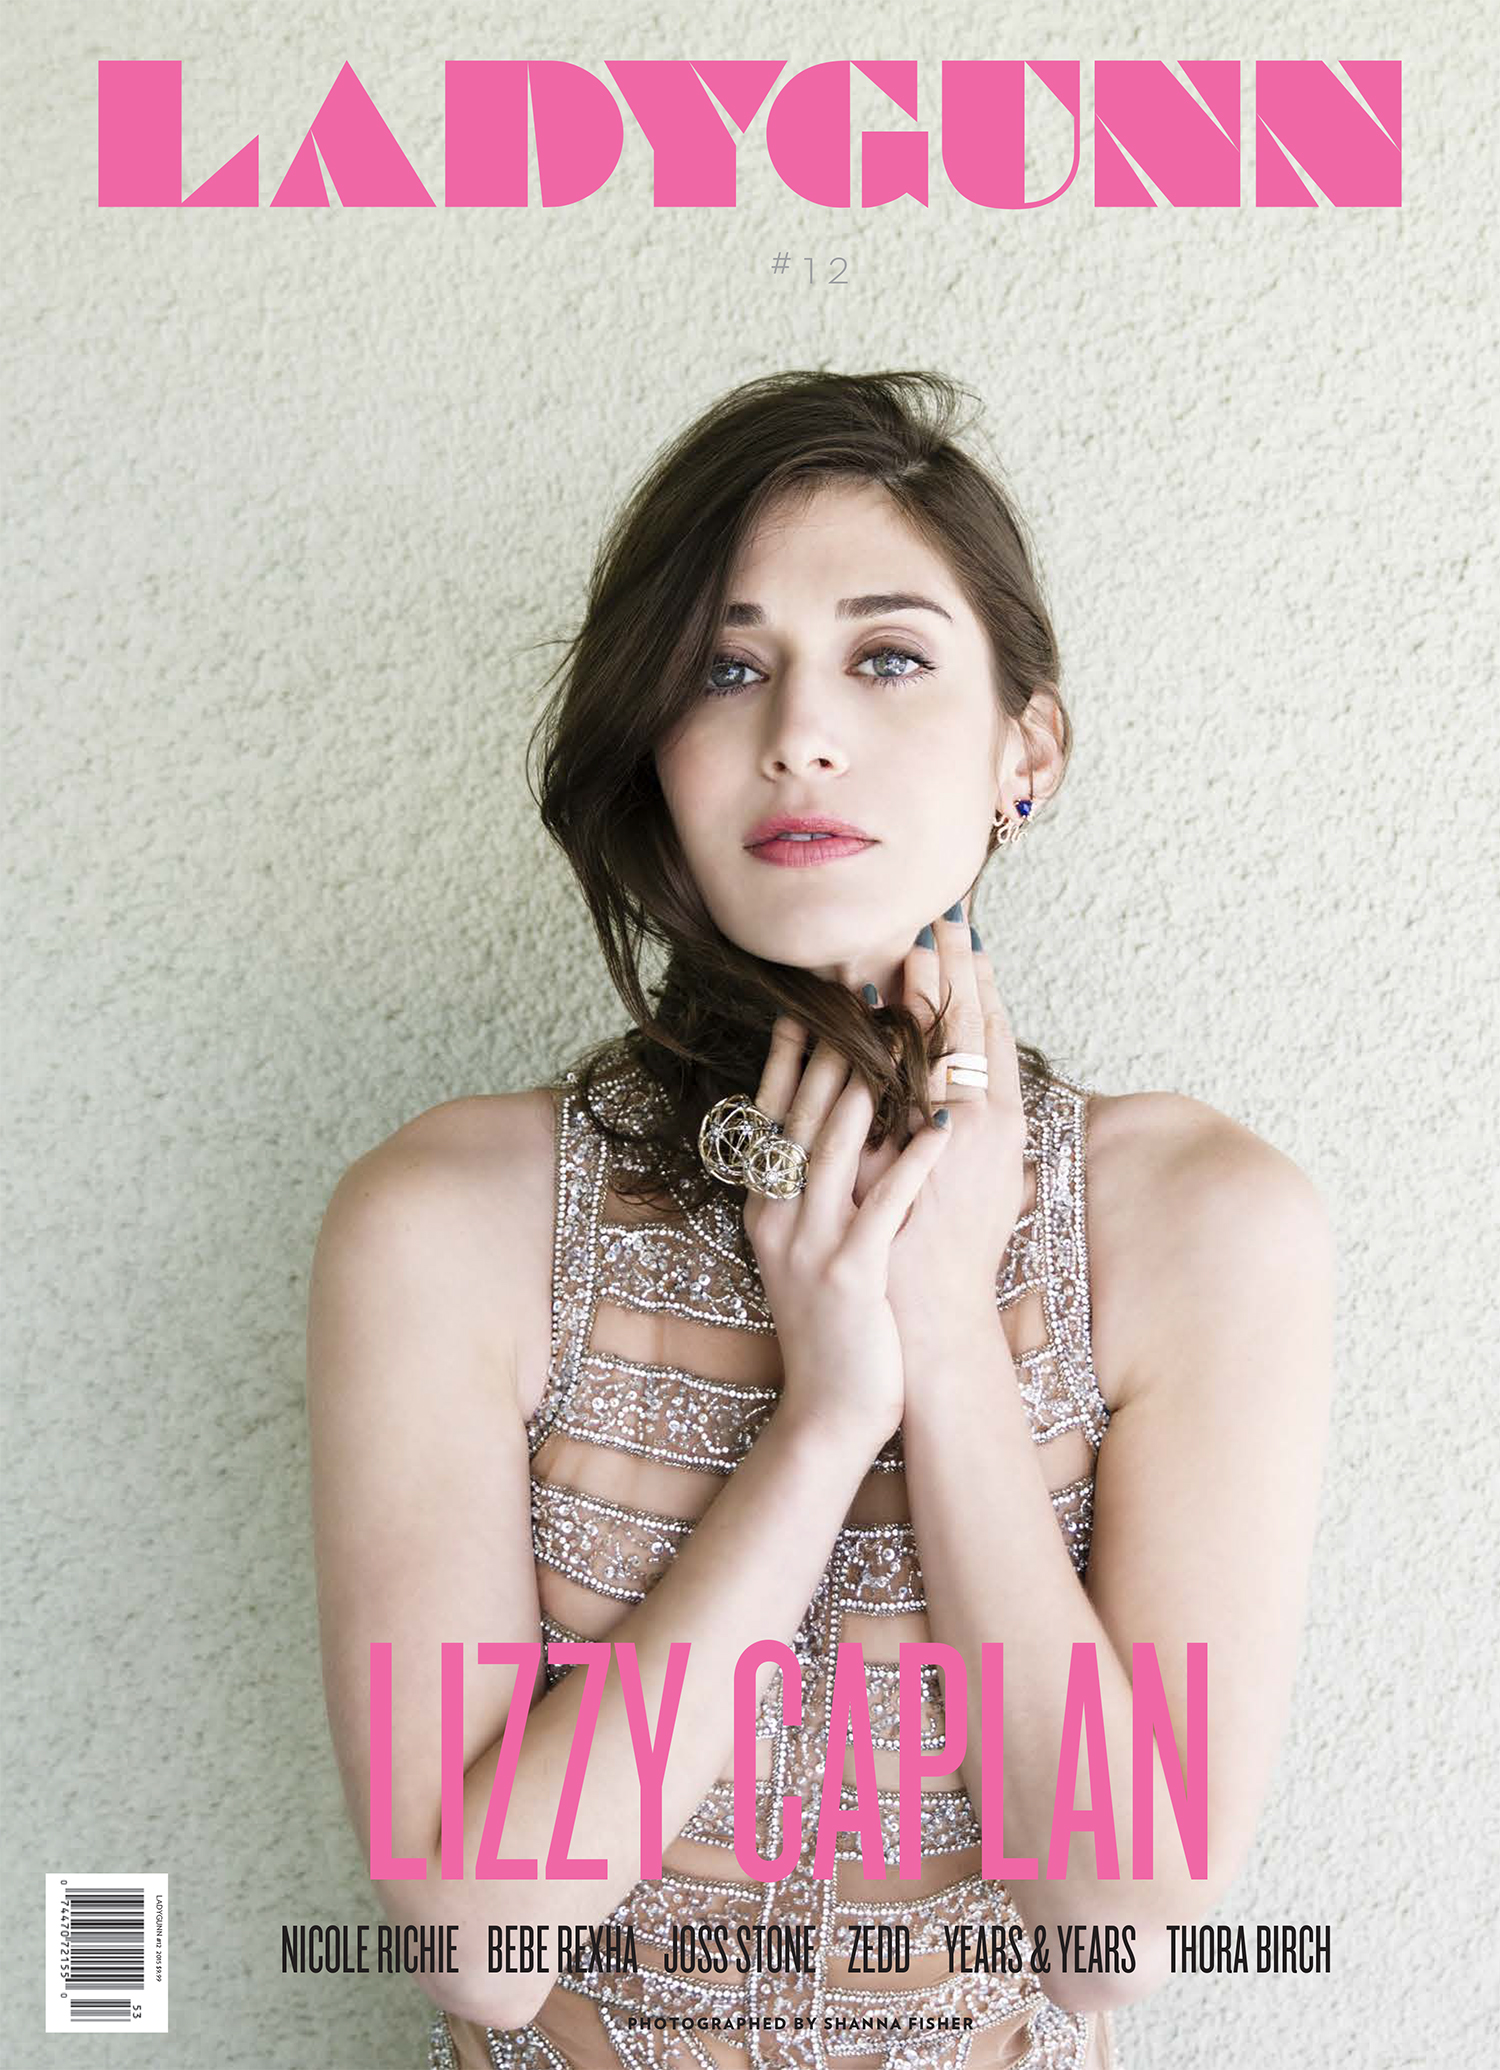 LADYGUNN #12 LIZZY CAPLAN PRINT—-SOLD OUT